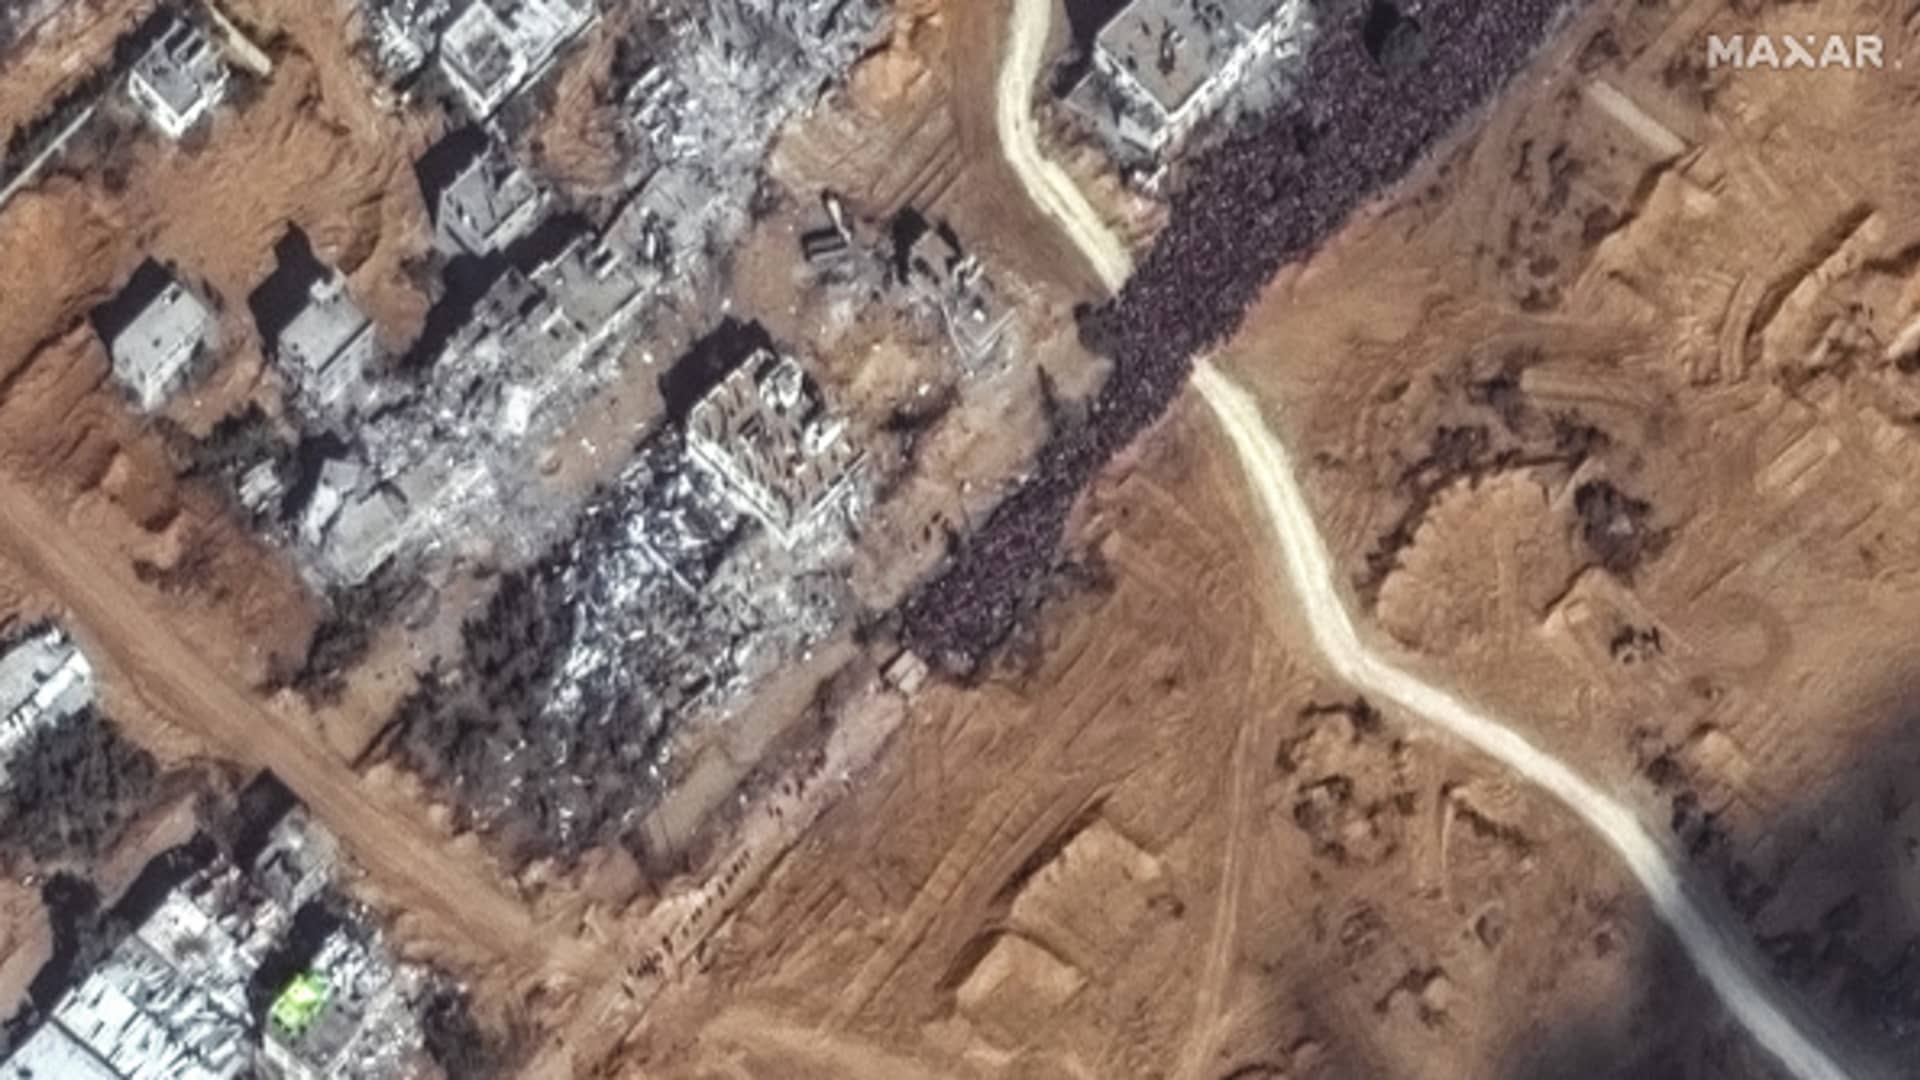 Maxar closeup satellite imagery shows a large crowd of people gathered along Salah al Deen Road in southern Gaza attempting to flee south along the evacuation corridor. 